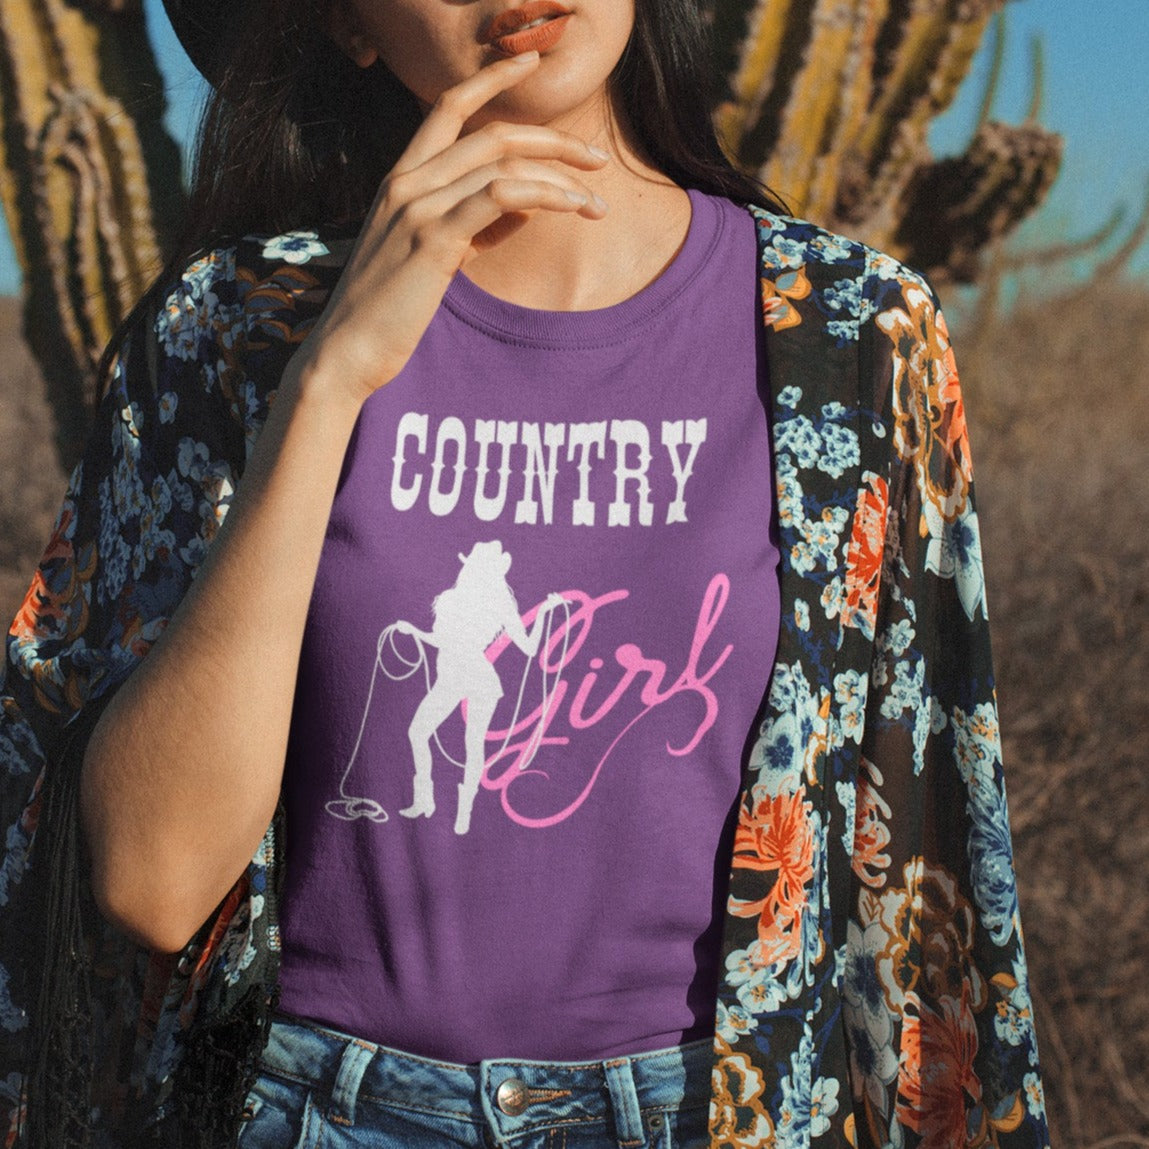 country-girl-with-lasso-team-purple-t-shirt-cowgirl-tee-mockup-featuring-a-hipster-girl-posing-against-a-cactus